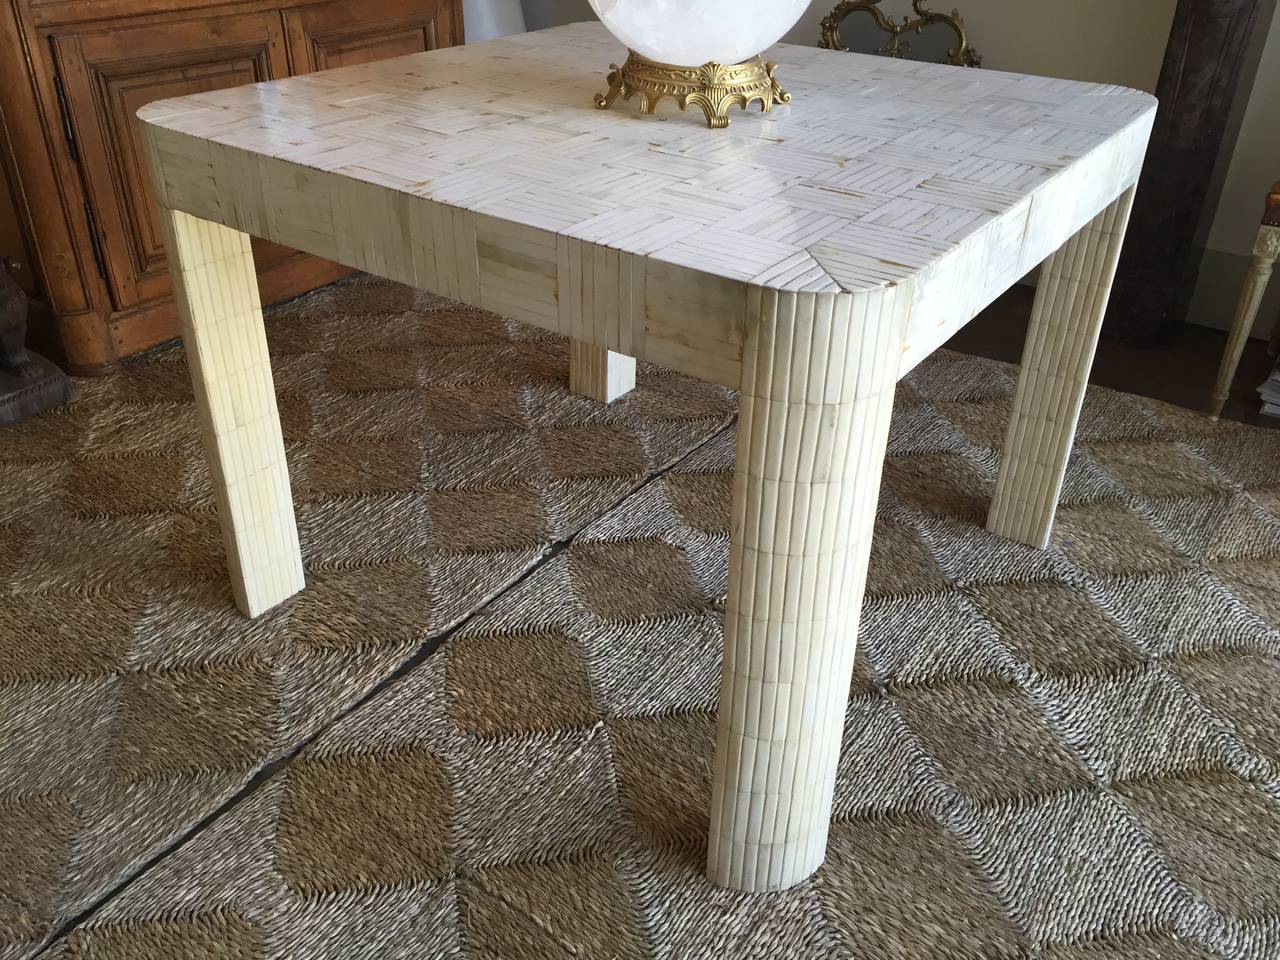 A Karl Springer Style Table with Tessellated Polished Bone Tiles